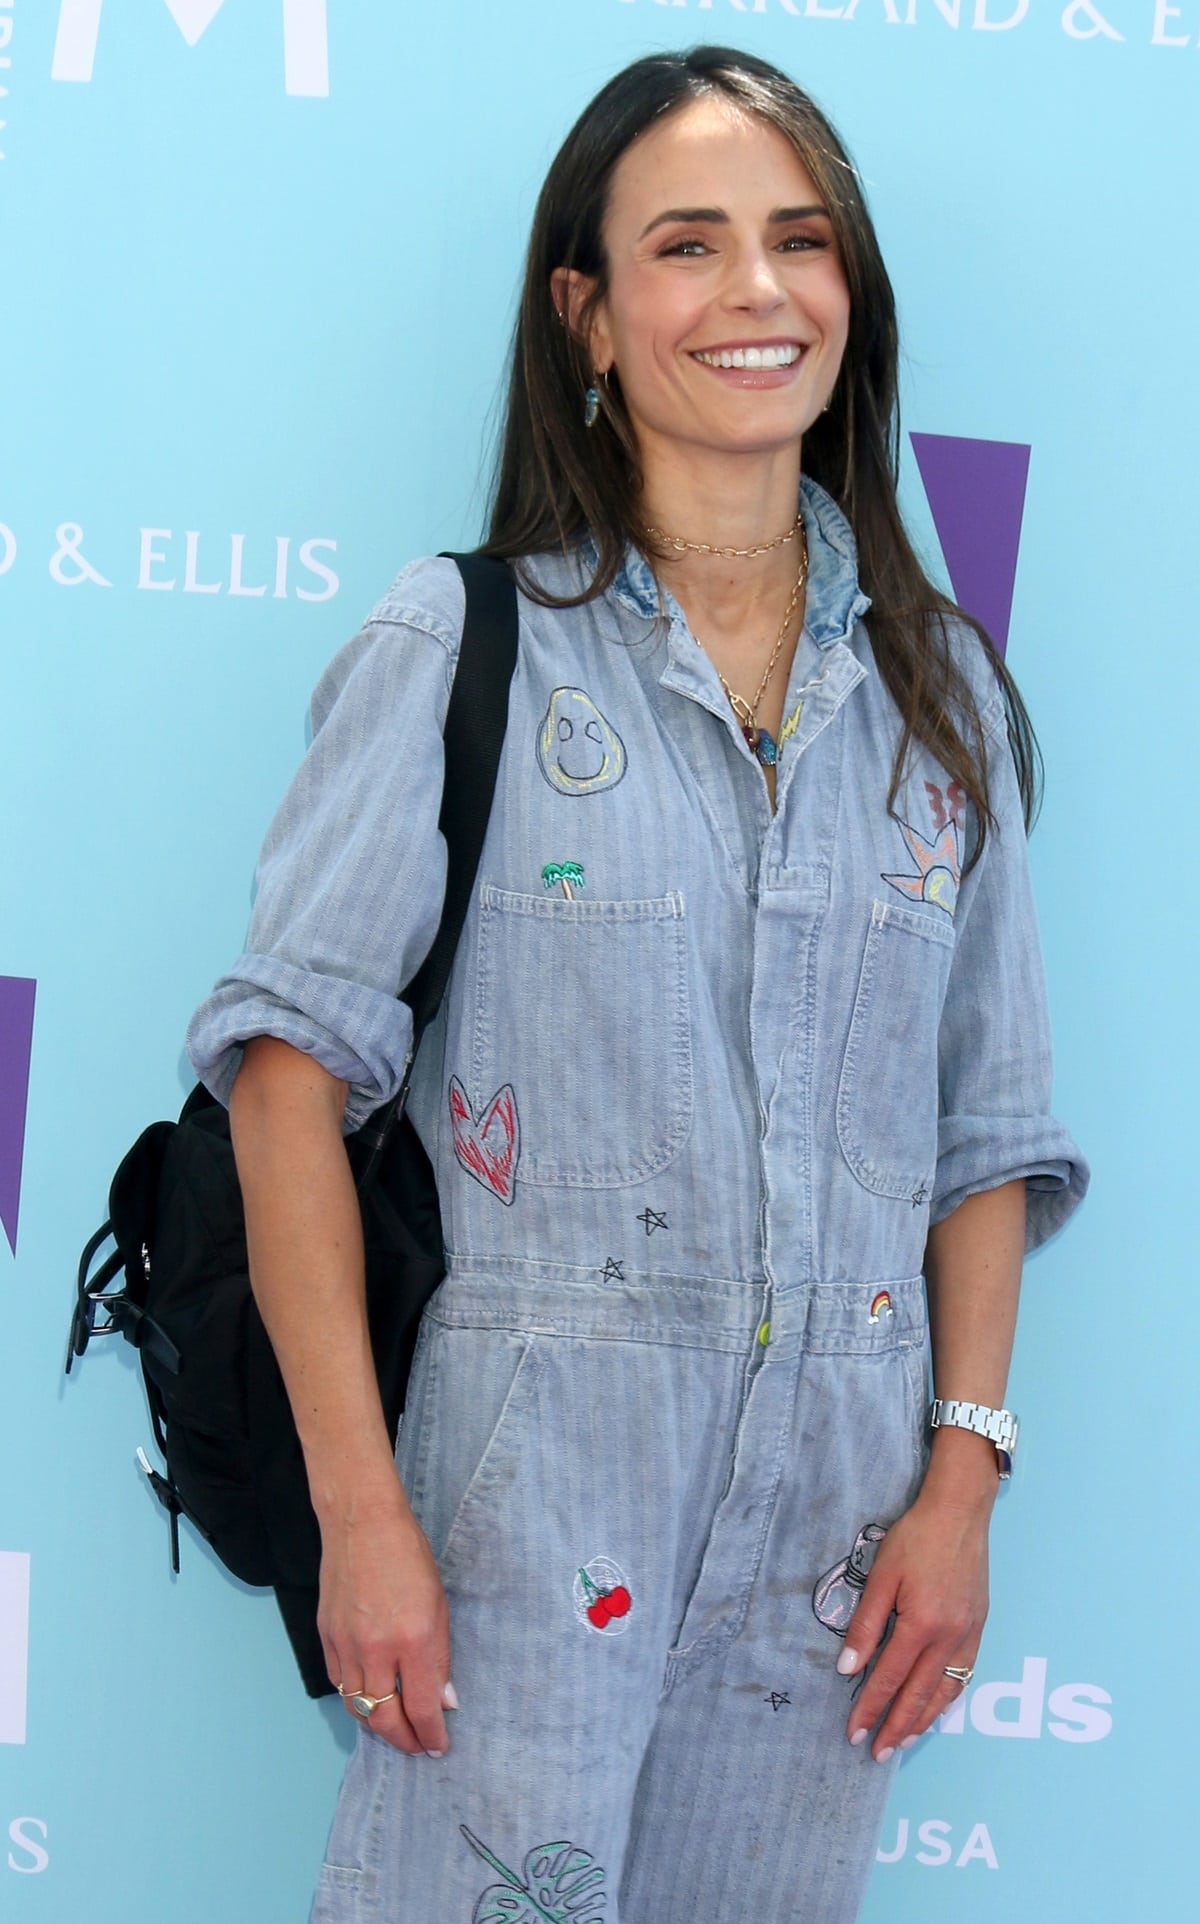 Jordana Brewster's father is of English, Scottish, and Irish descent, while her mother is of Portuguese-Brazilian origin